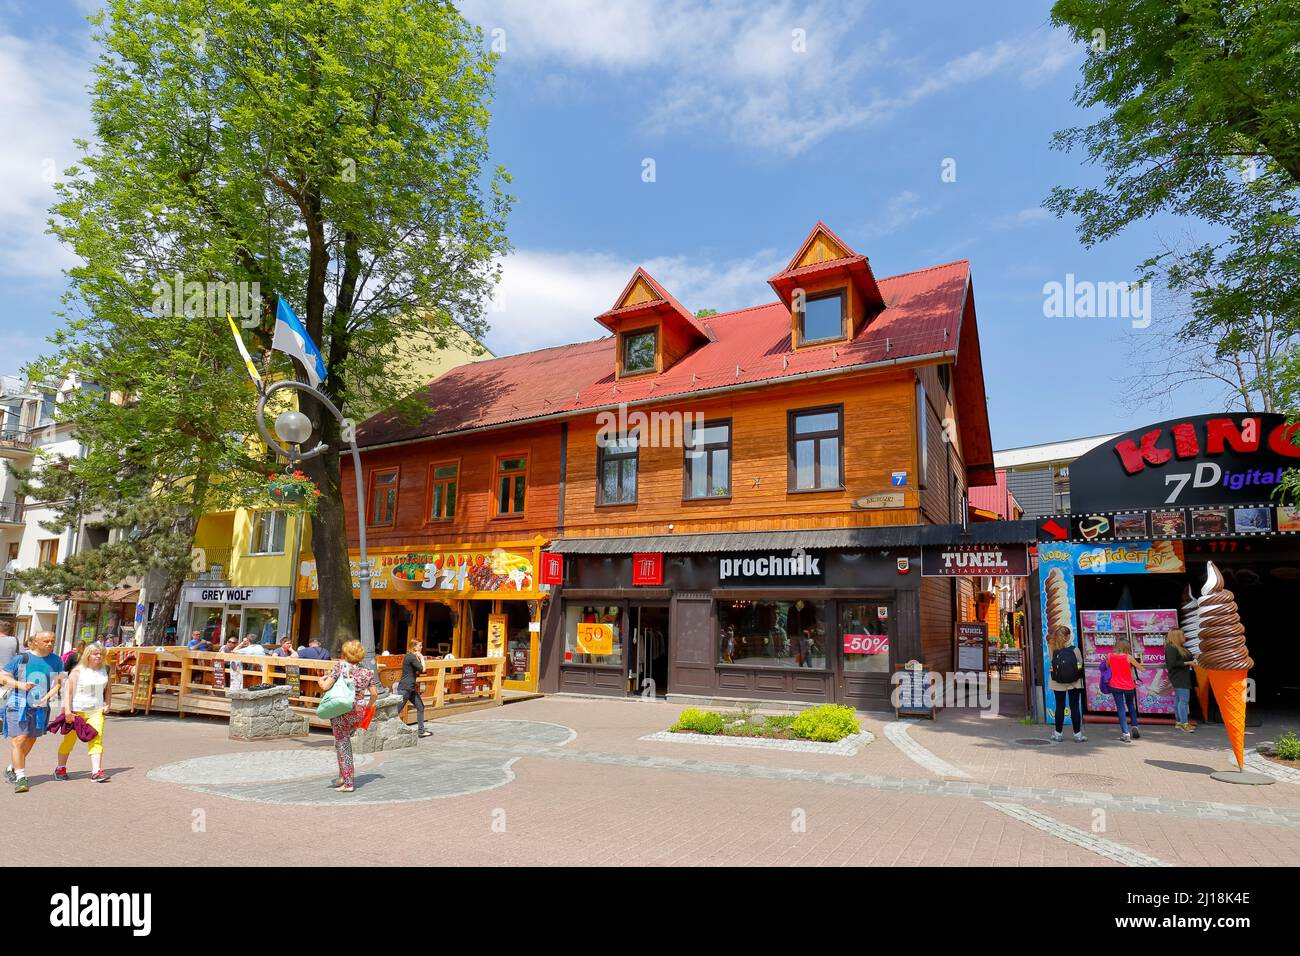 Zakopane, Poland - June 10, 2015: Residential house at Krupowki street, built of wood approx. 1890, listed in the municipal register of architectural Stock Photo